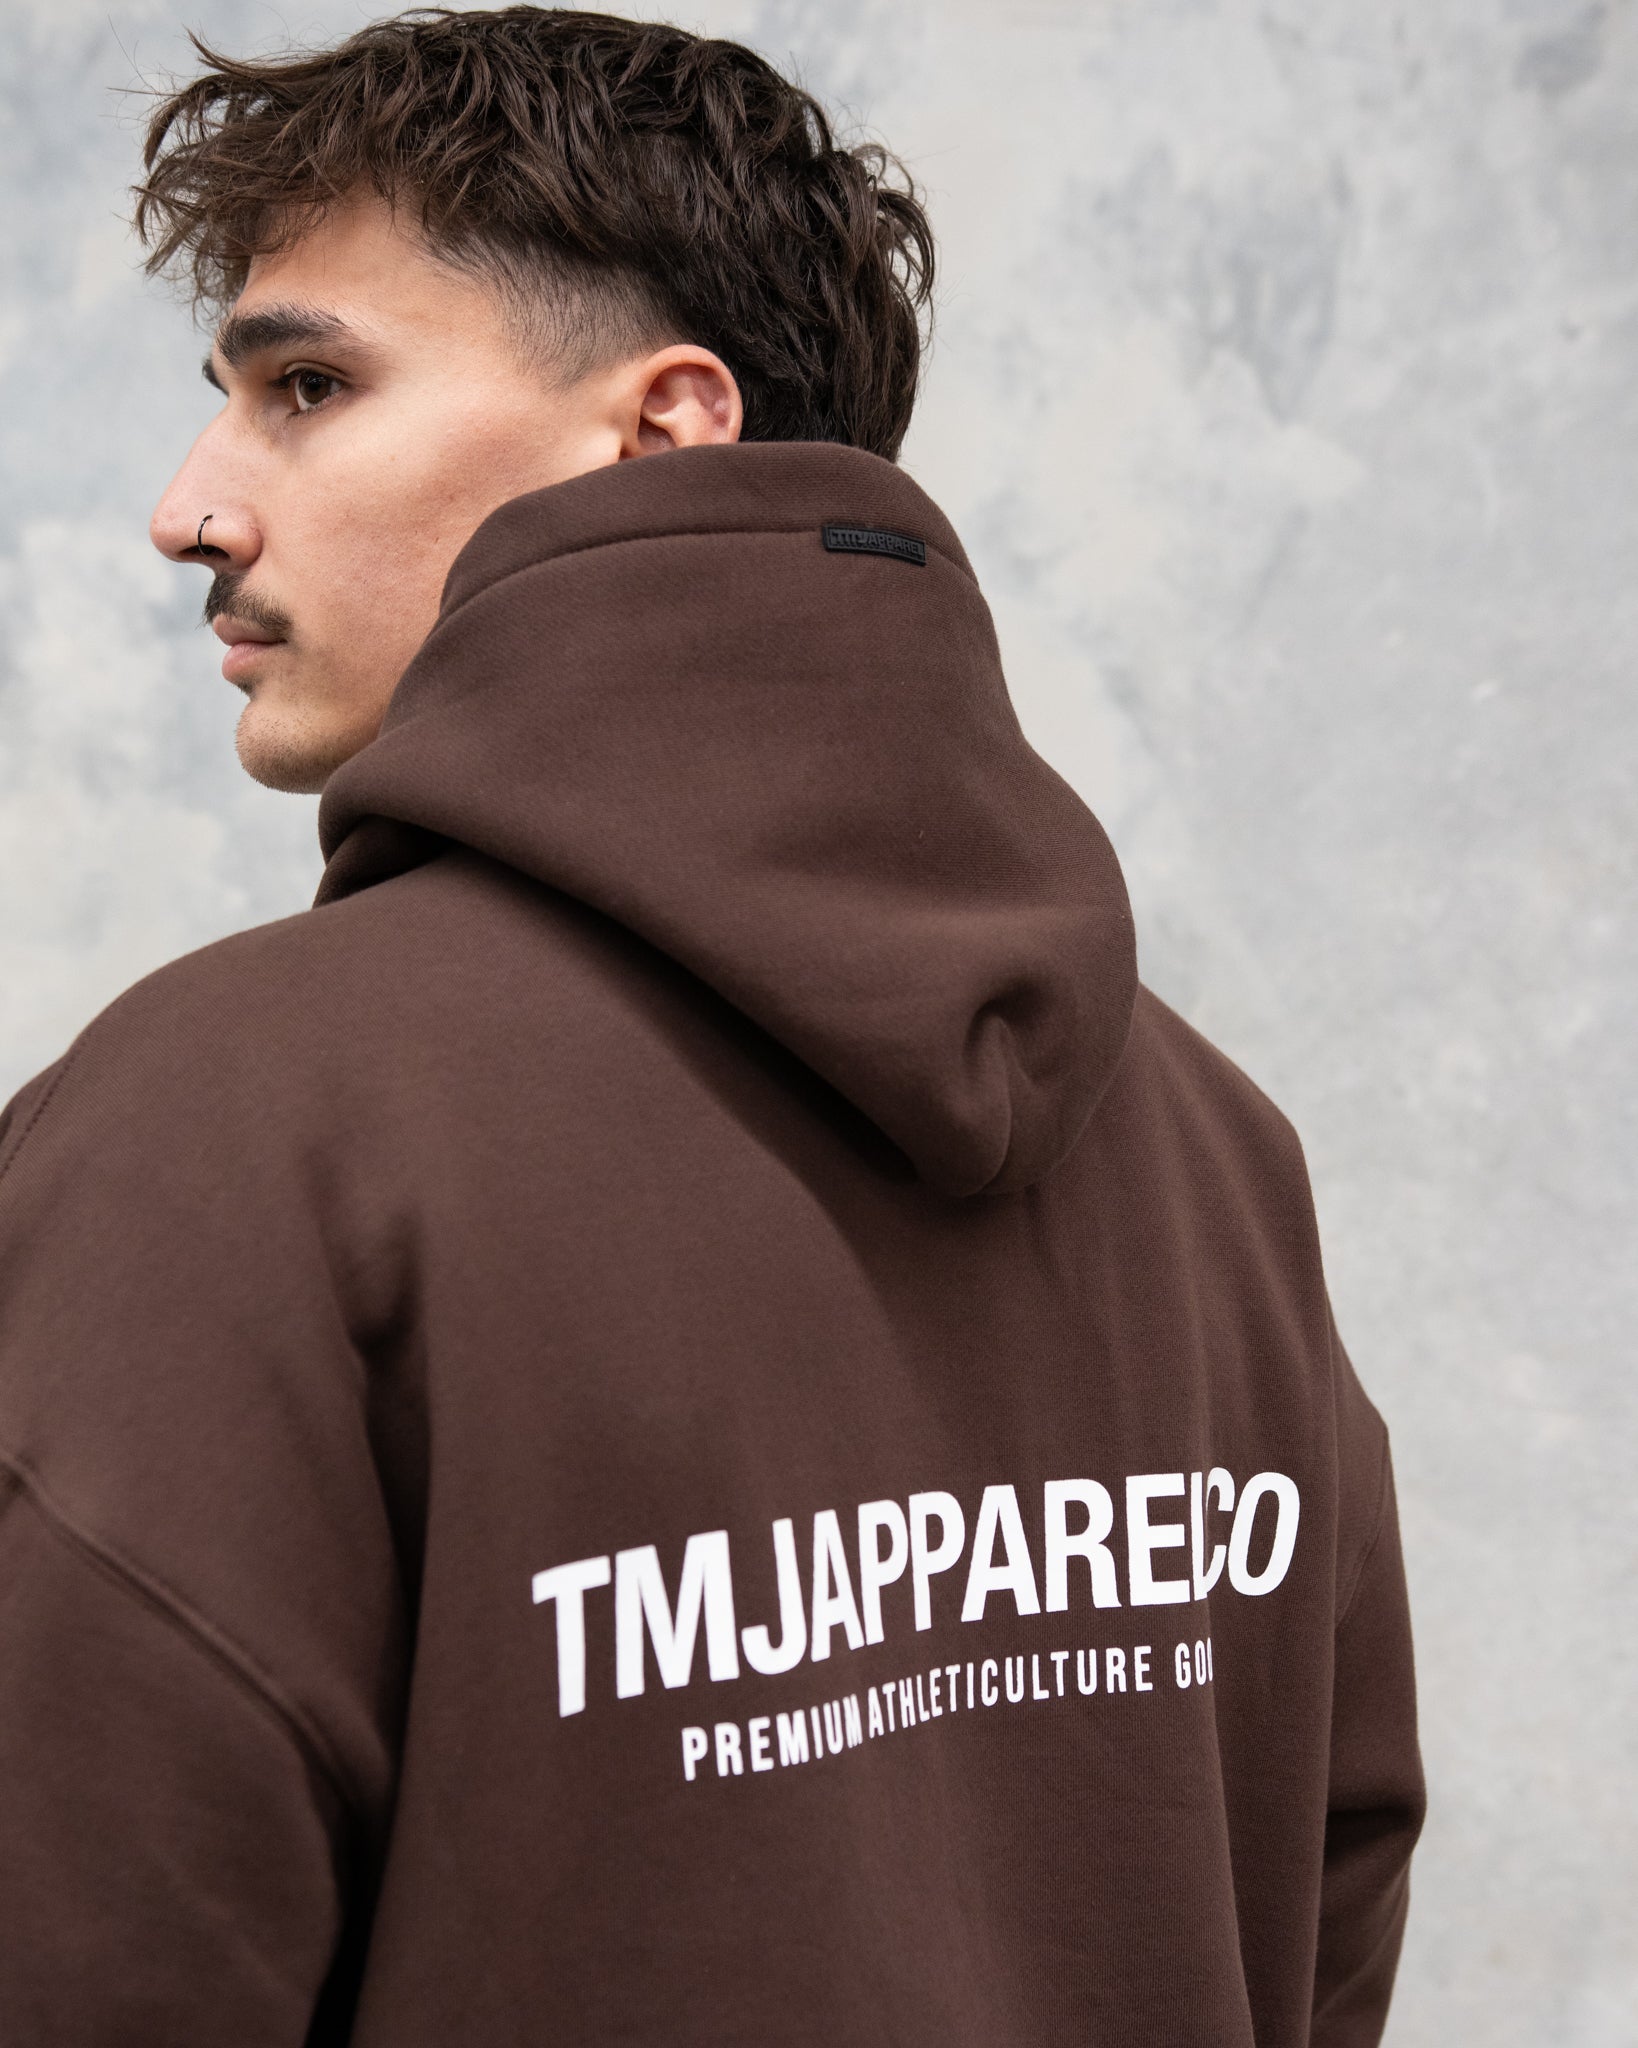  Male wearing TMJ Apparel Athleticulture Hoodie in Brown showing the back of the hoodie with white text saying TMJAPPARELCO Premium Athleticulture Goods in the middle centre of back.